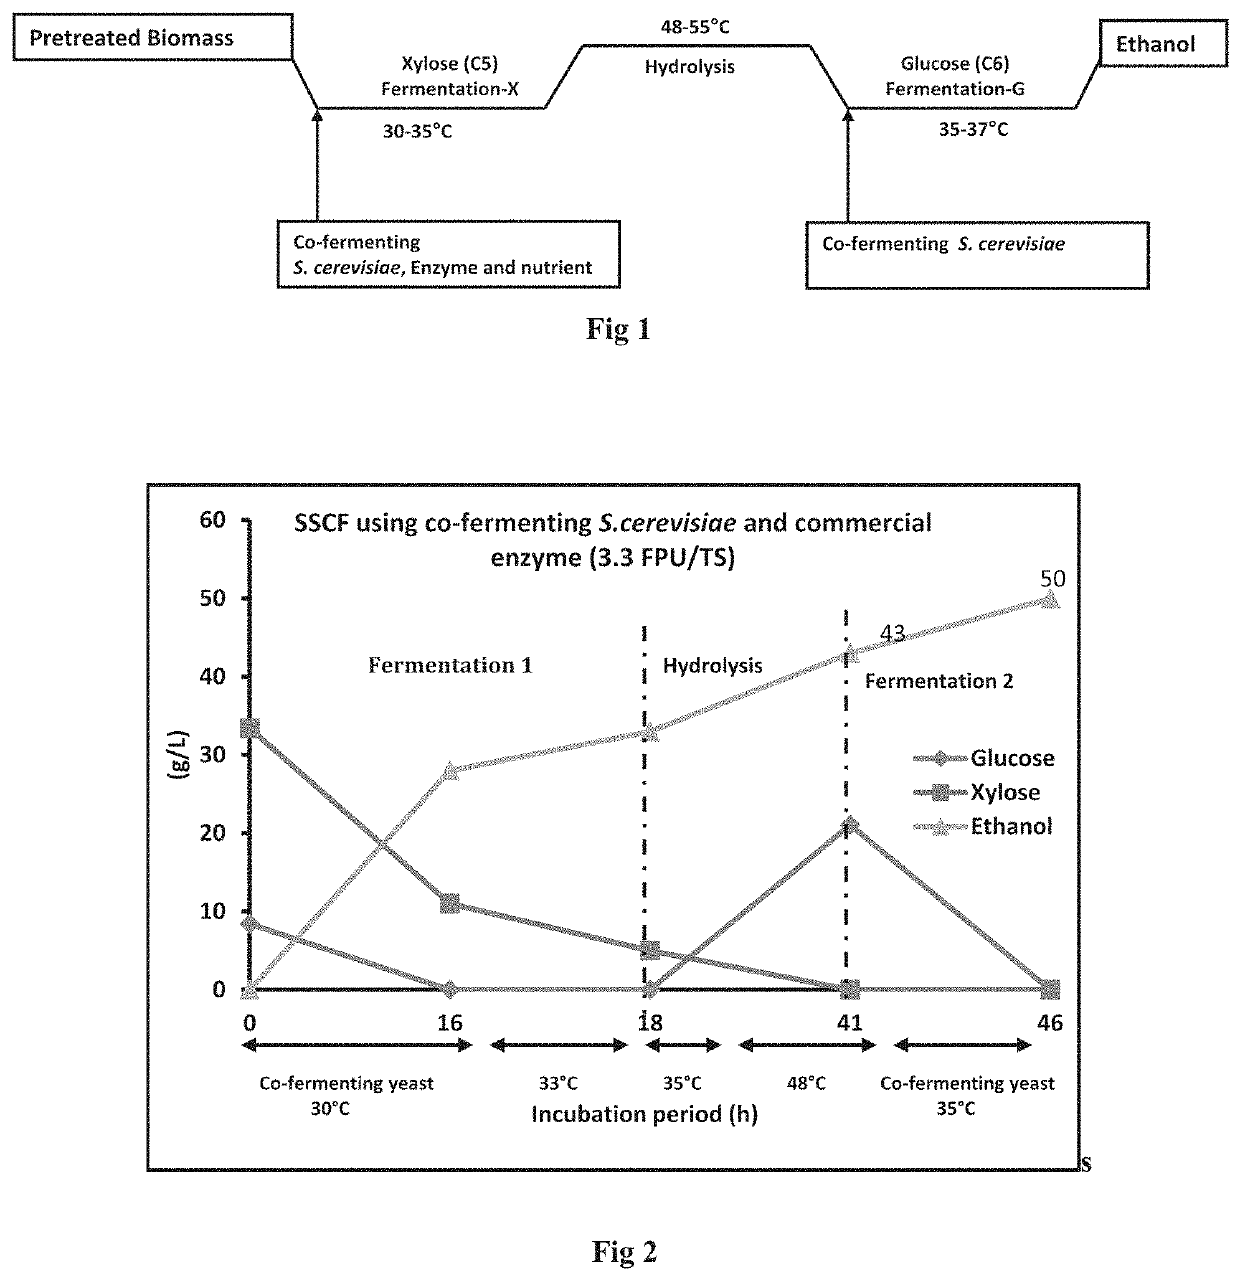 Sscf process for second generation ethanol production from lignocellulosic biomass and 2g residual biomass